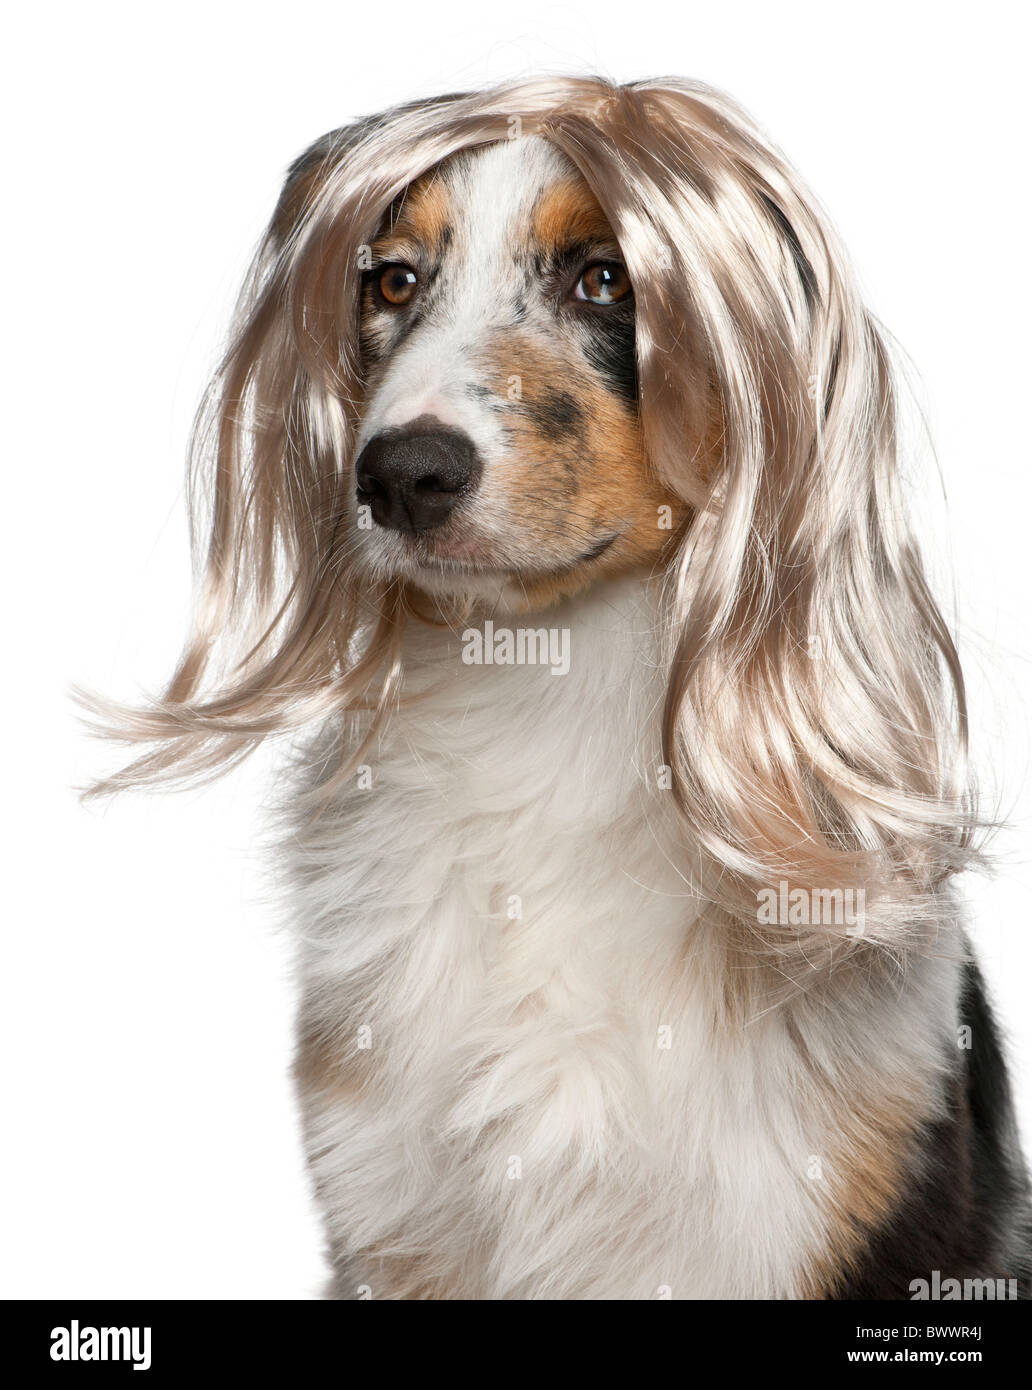 Australian Shepherd puppy wearing a wig, 5 months old, in front of white background Stock Photo